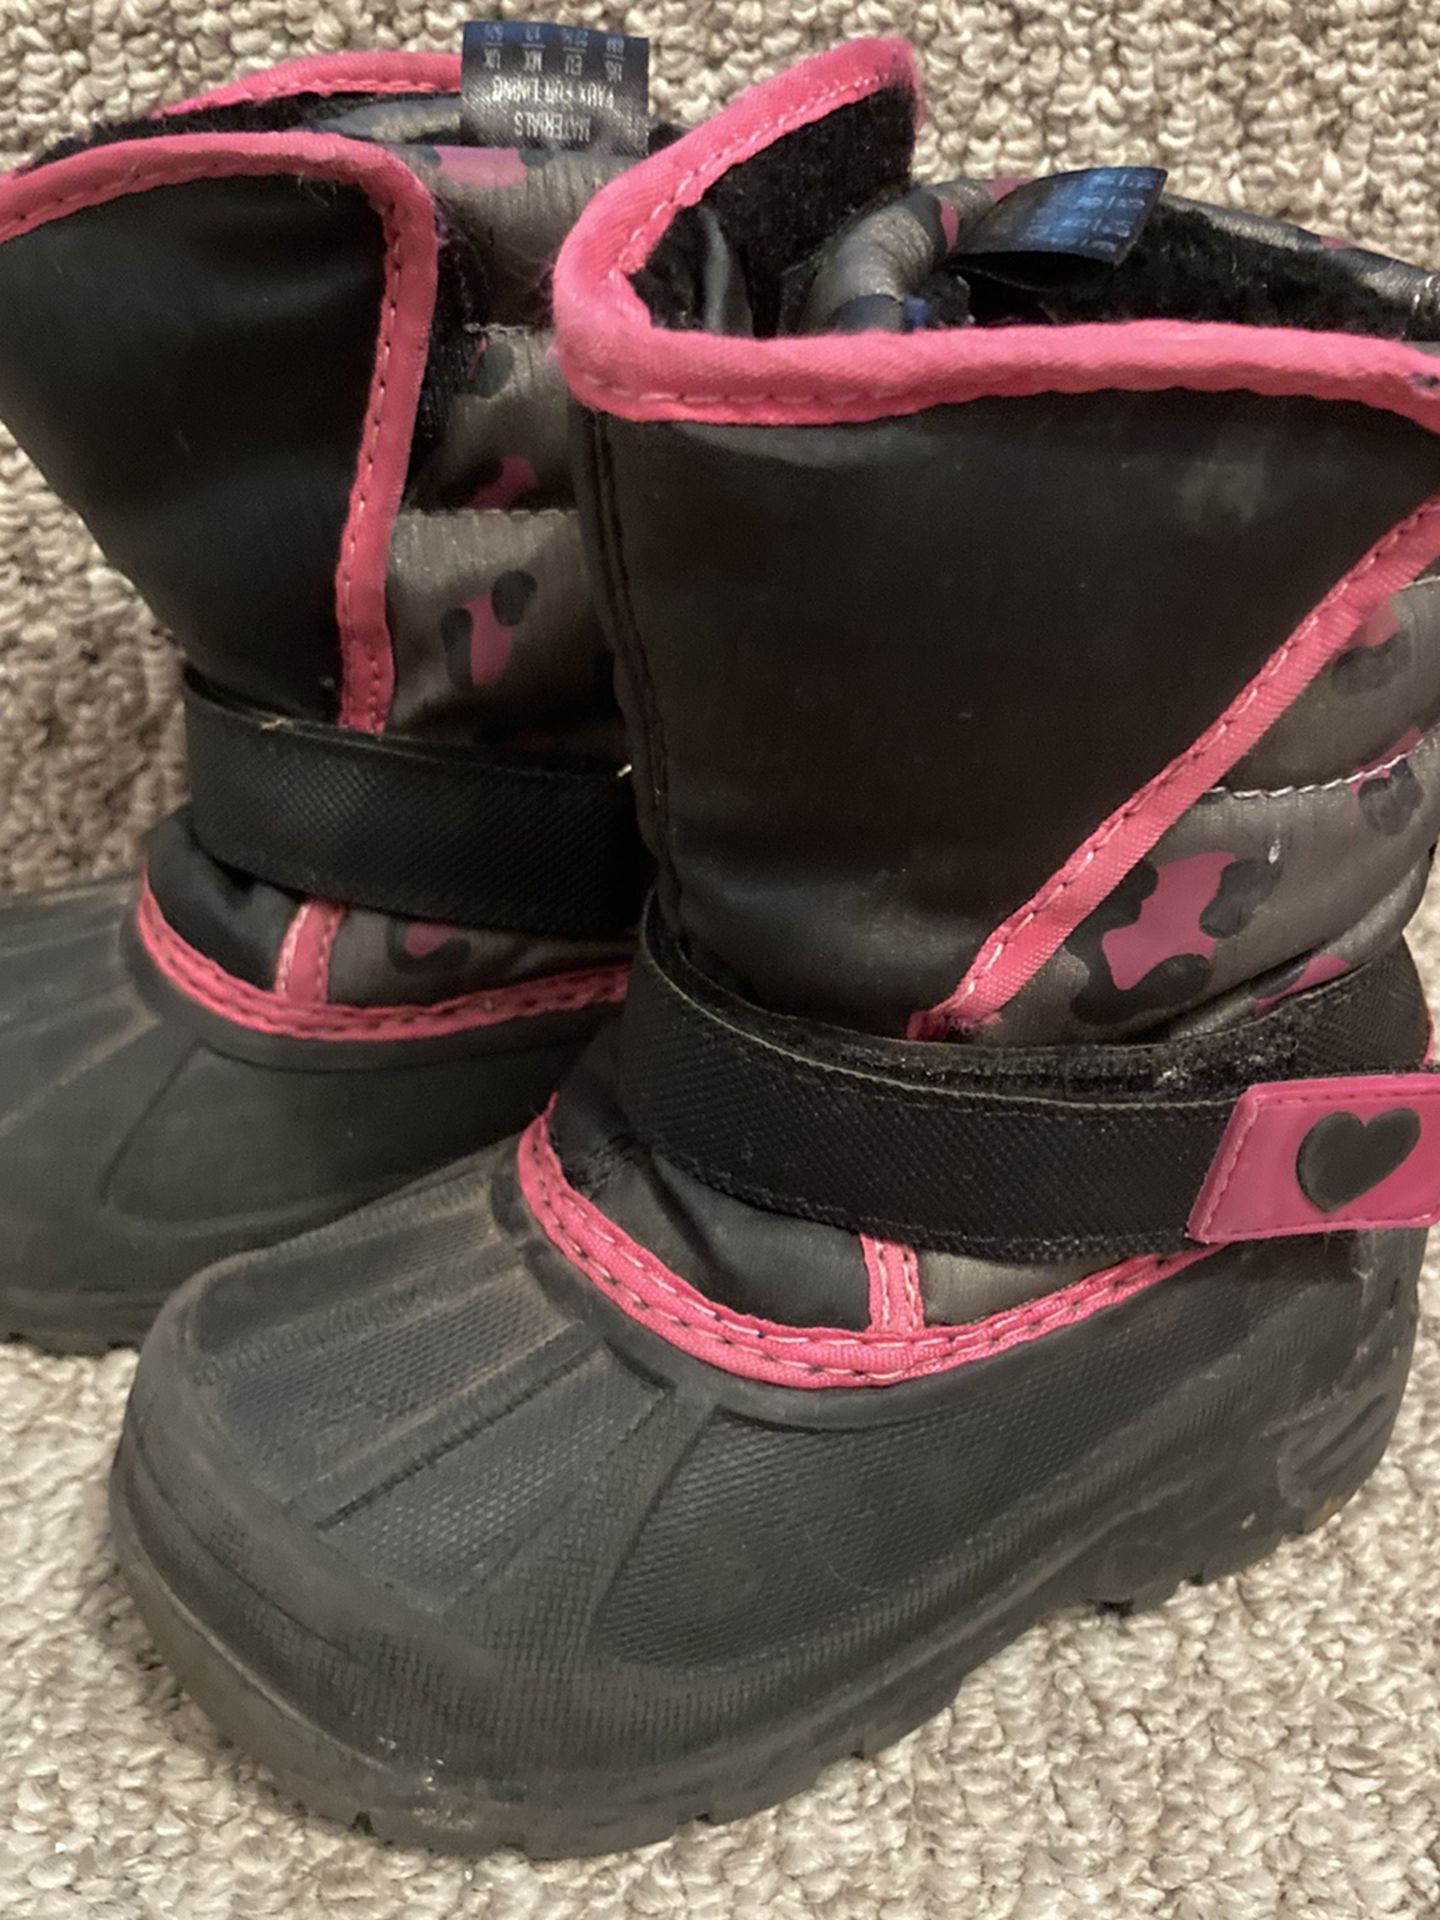 Snow boots, toddler size 6